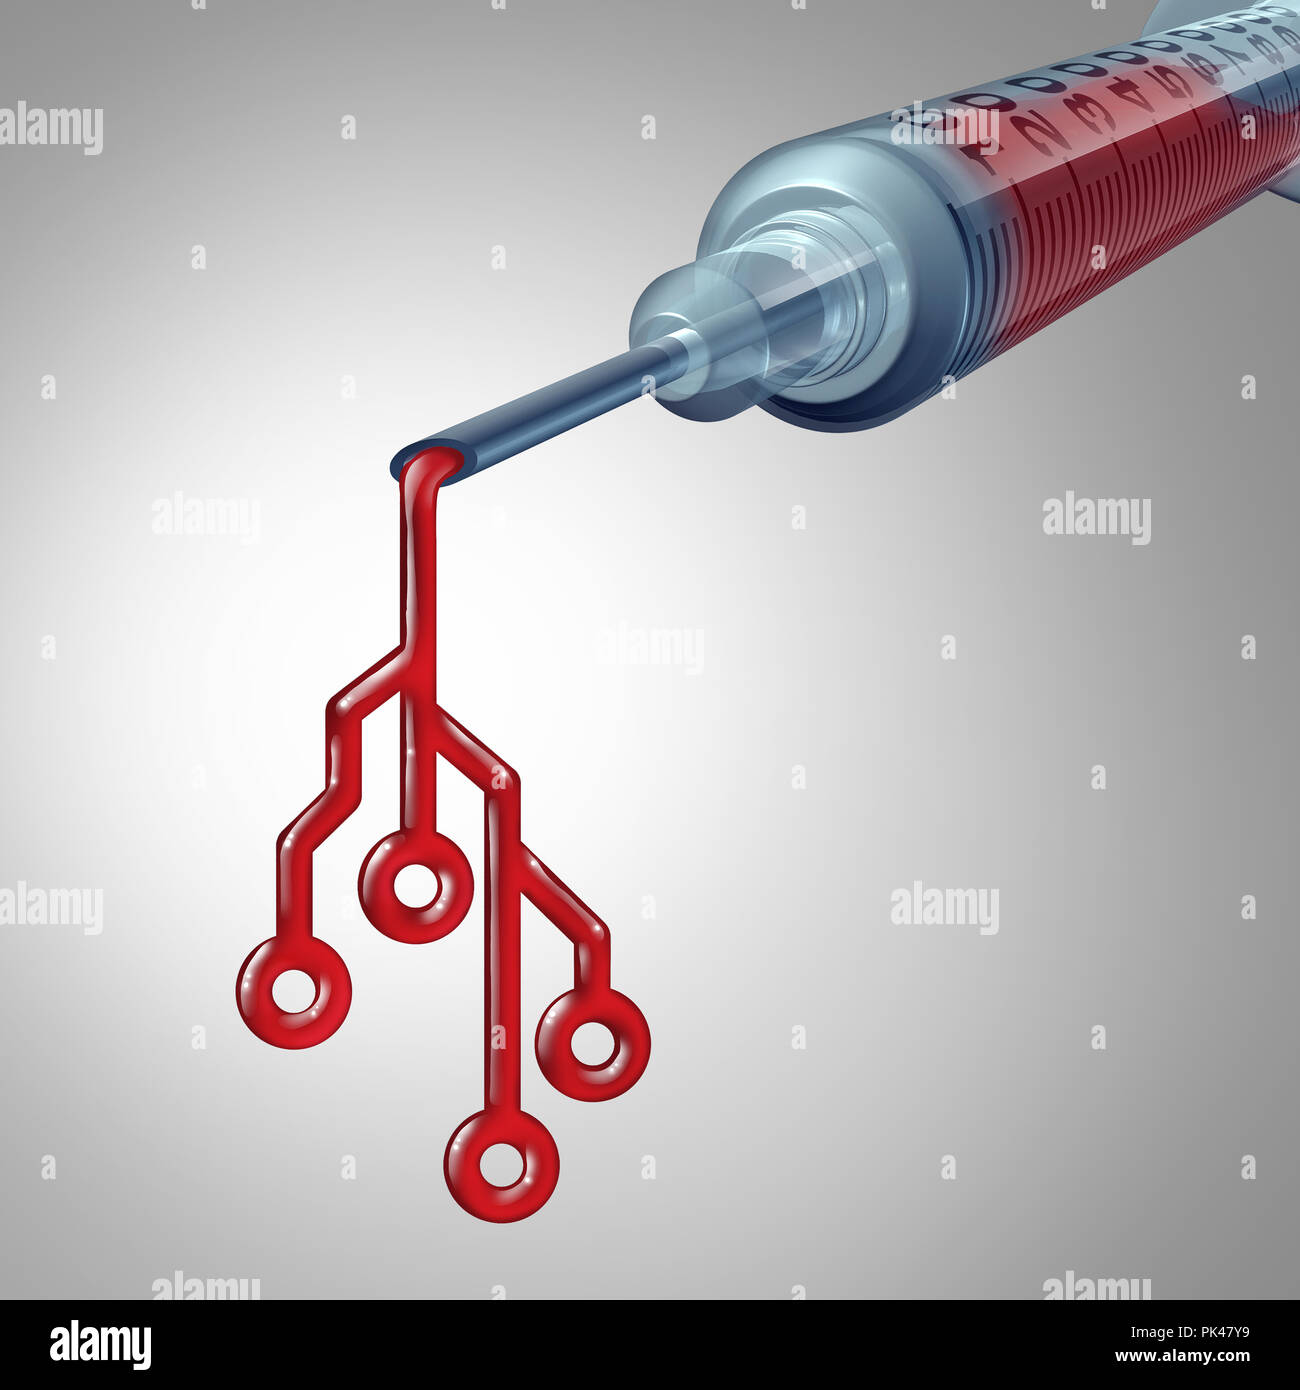 Medical technology and biomedical engineering or biotechnology medicine technologies health services as a hospital syringe with blood. Stock Photo